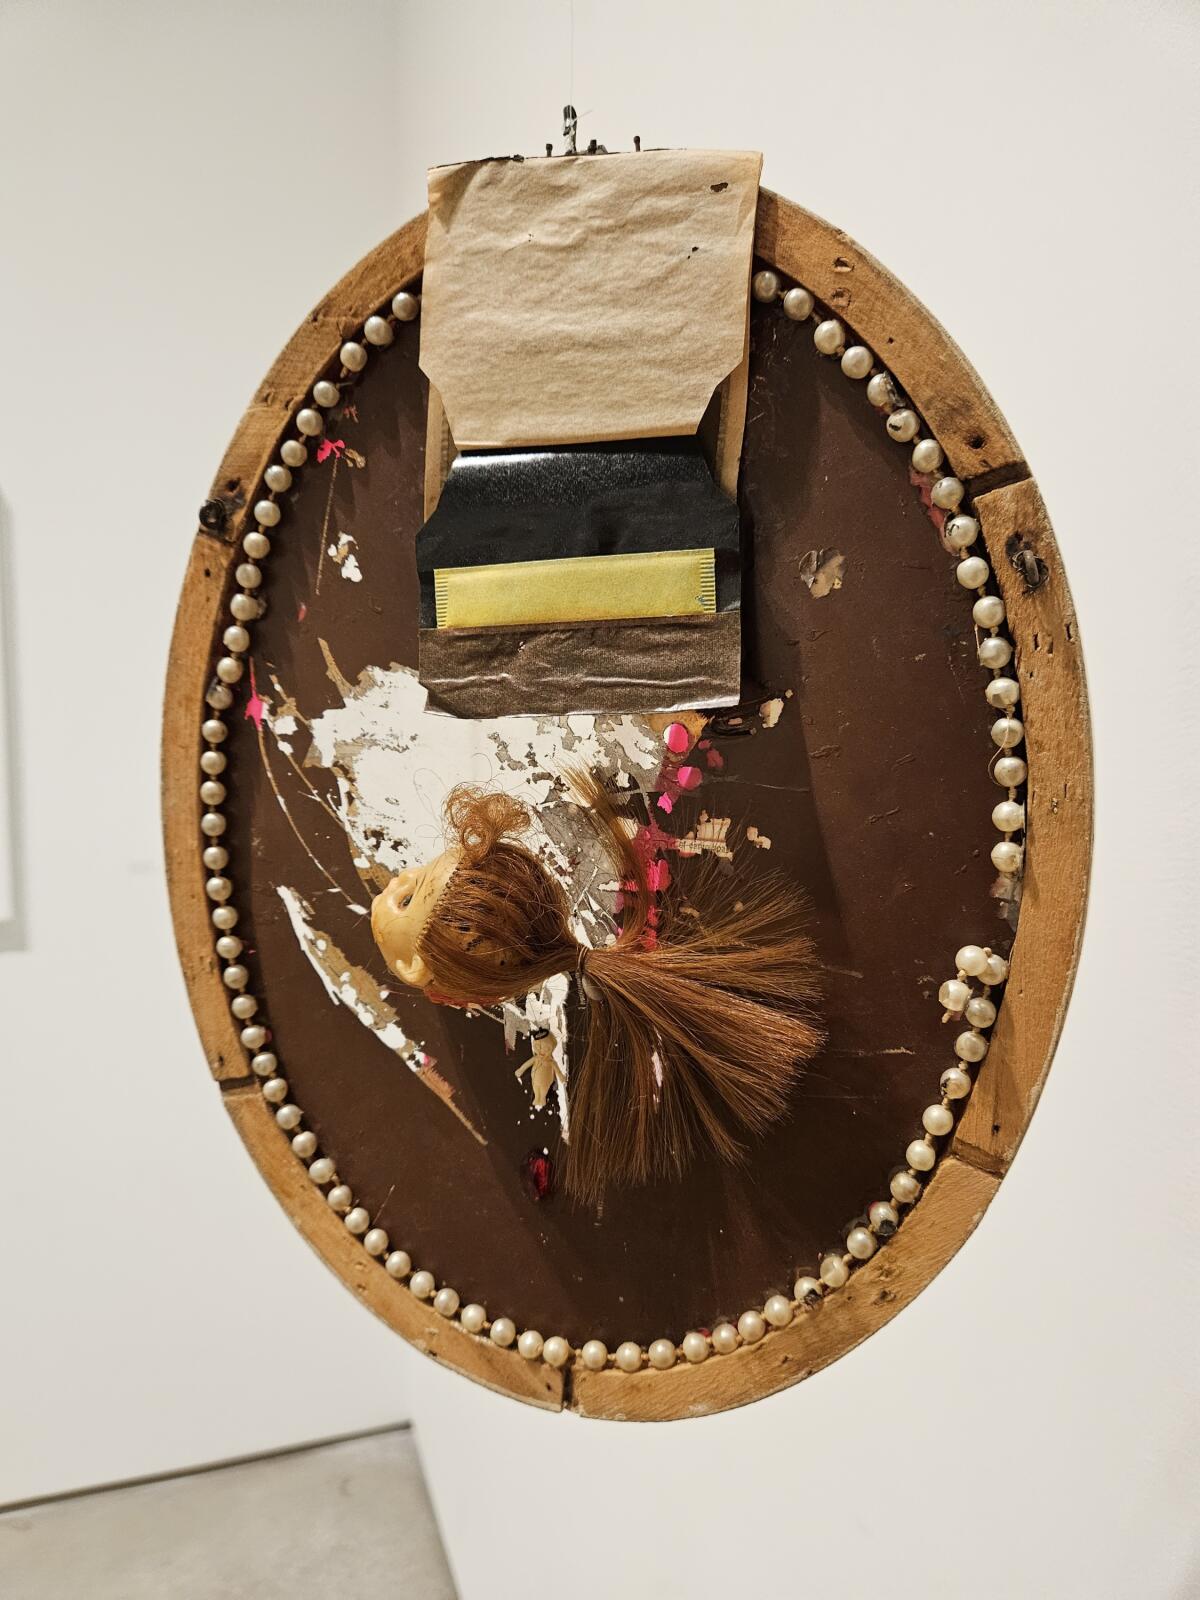 An oval panel framed by a string of pearls with the severed head of a doll.